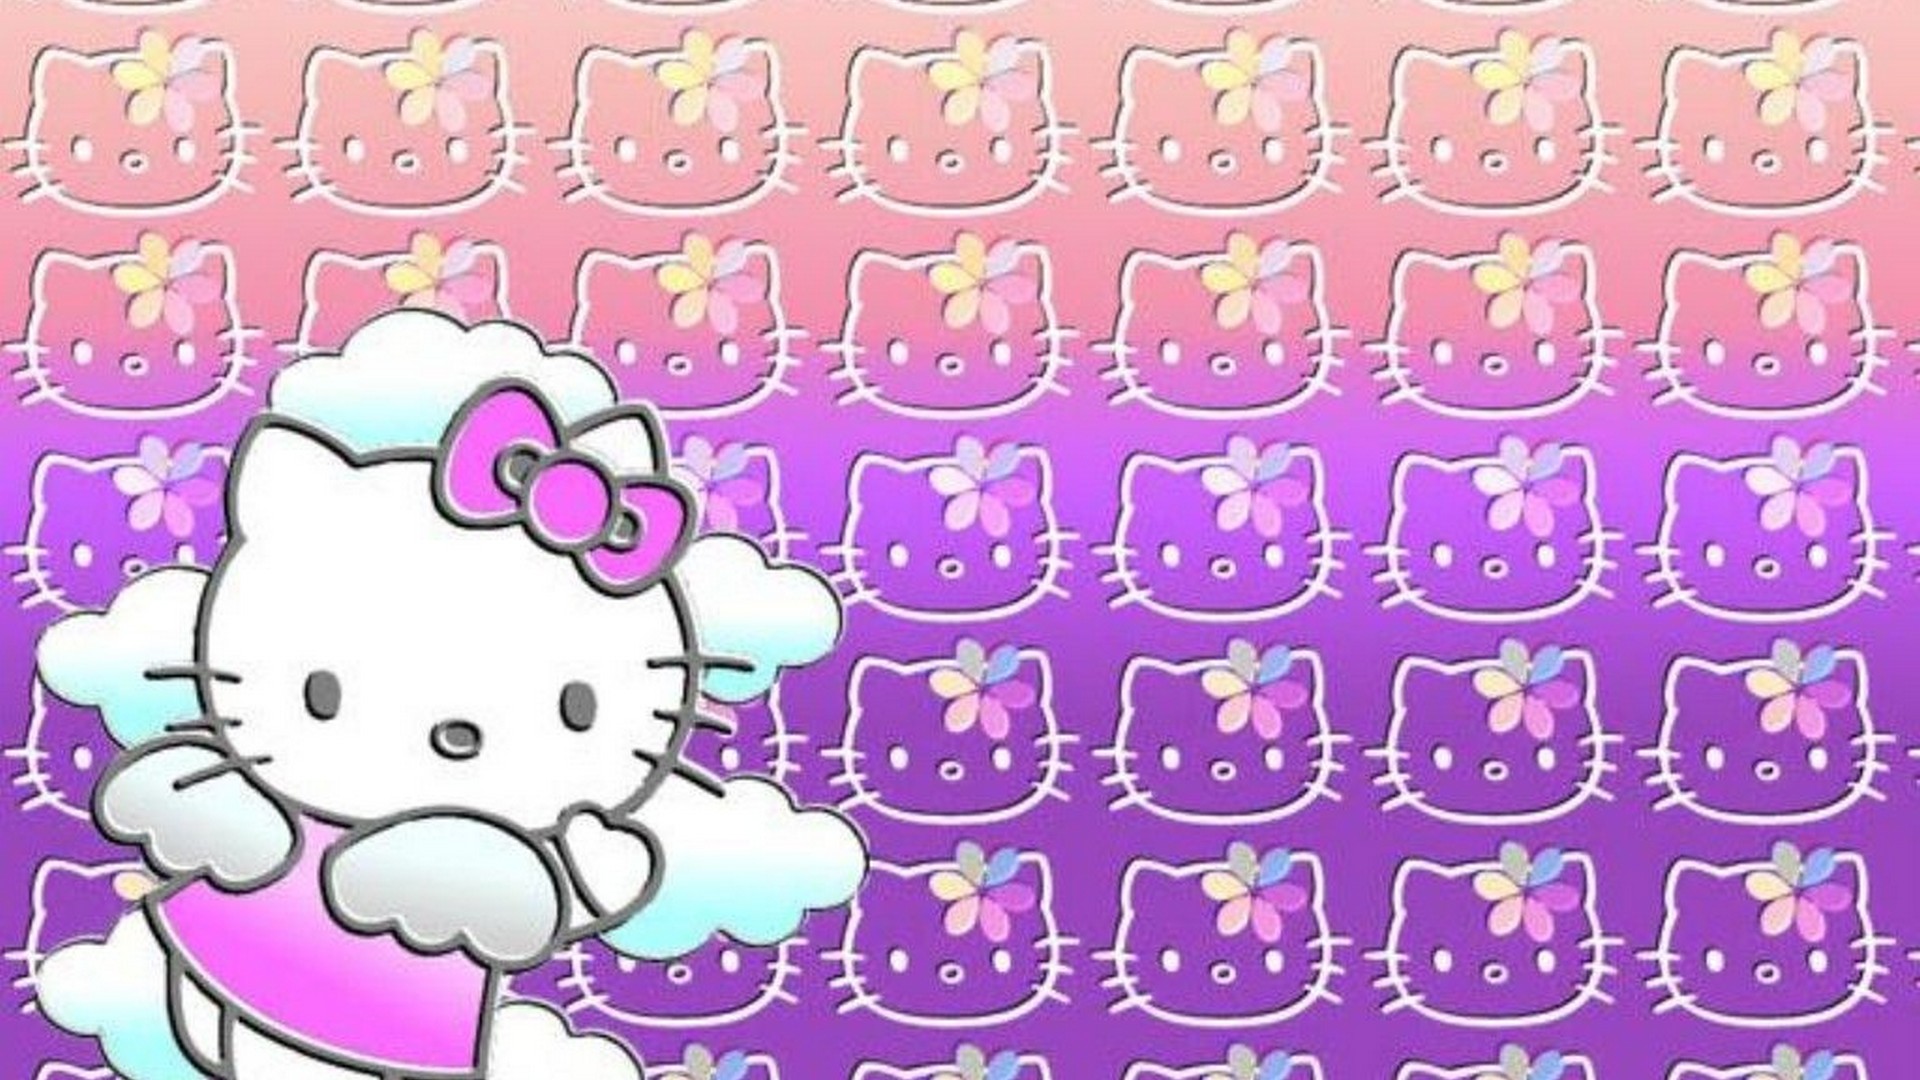 Sanrio Hello Kitty Desktop Wallpaper with resolution 1920X1080 pixel. You can use this wallpaper as background for your desktop Computer Screensavers, Android or iPhone smartphones